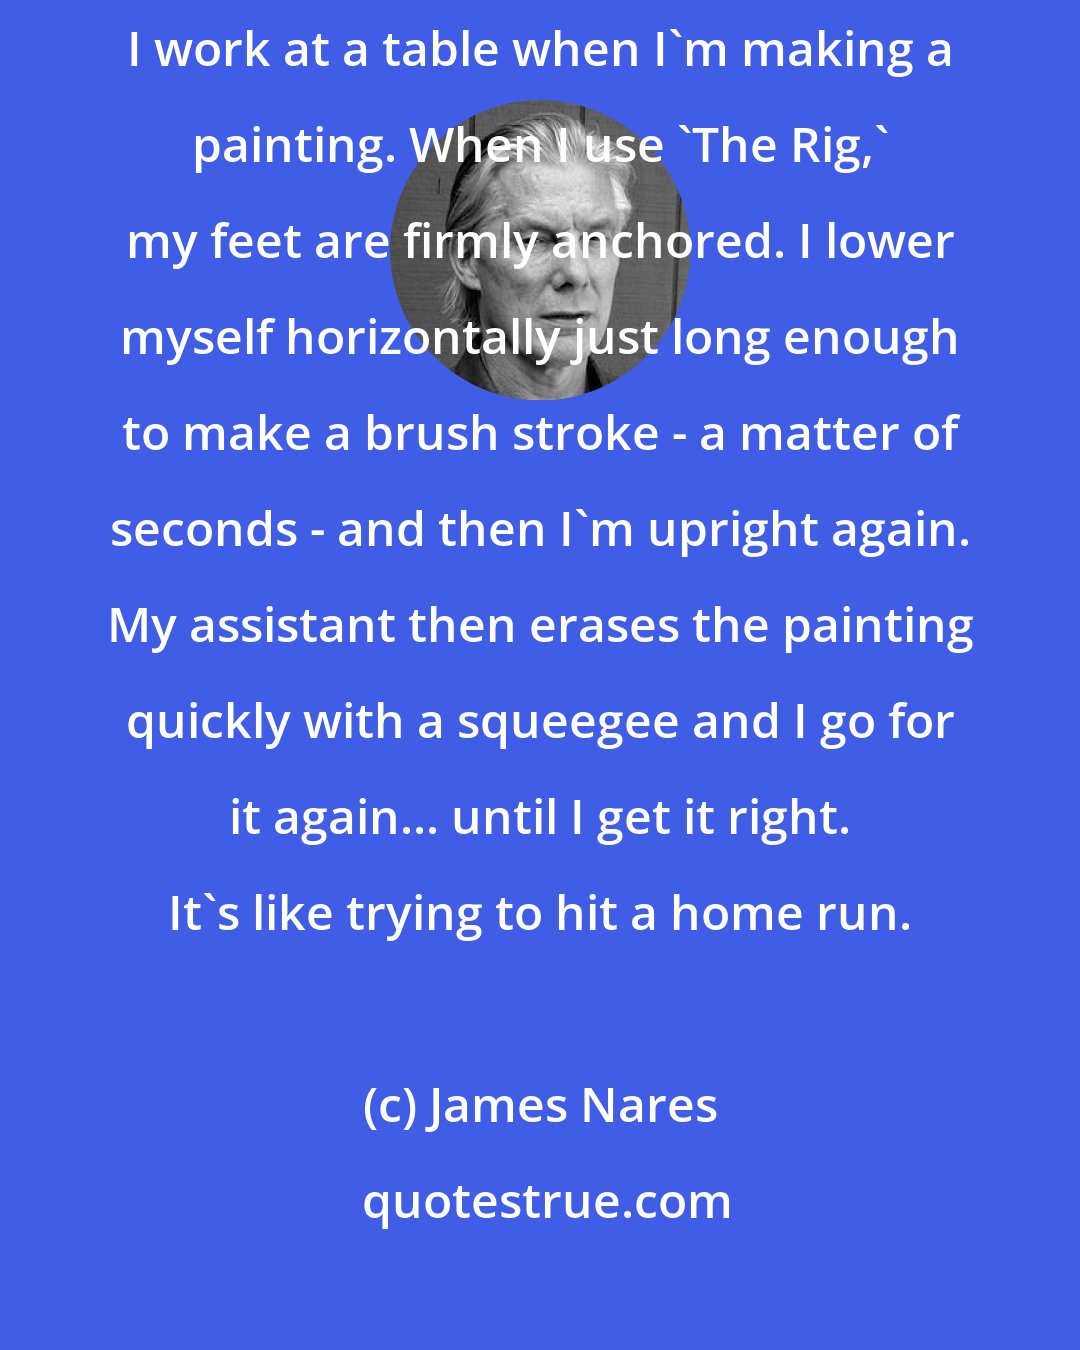 James Nares: It's true, I do sometimes suspend myself over the canvas, but mostly I work at a table when I'm making a painting. When I use 'The Rig,' my feet are firmly anchored. I lower myself horizontally just long enough to make a brush stroke - a matter of seconds - and then I'm upright again. My assistant then erases the painting quickly with a squeegee and I go for it again... until I get it right. It's like trying to hit a home run.